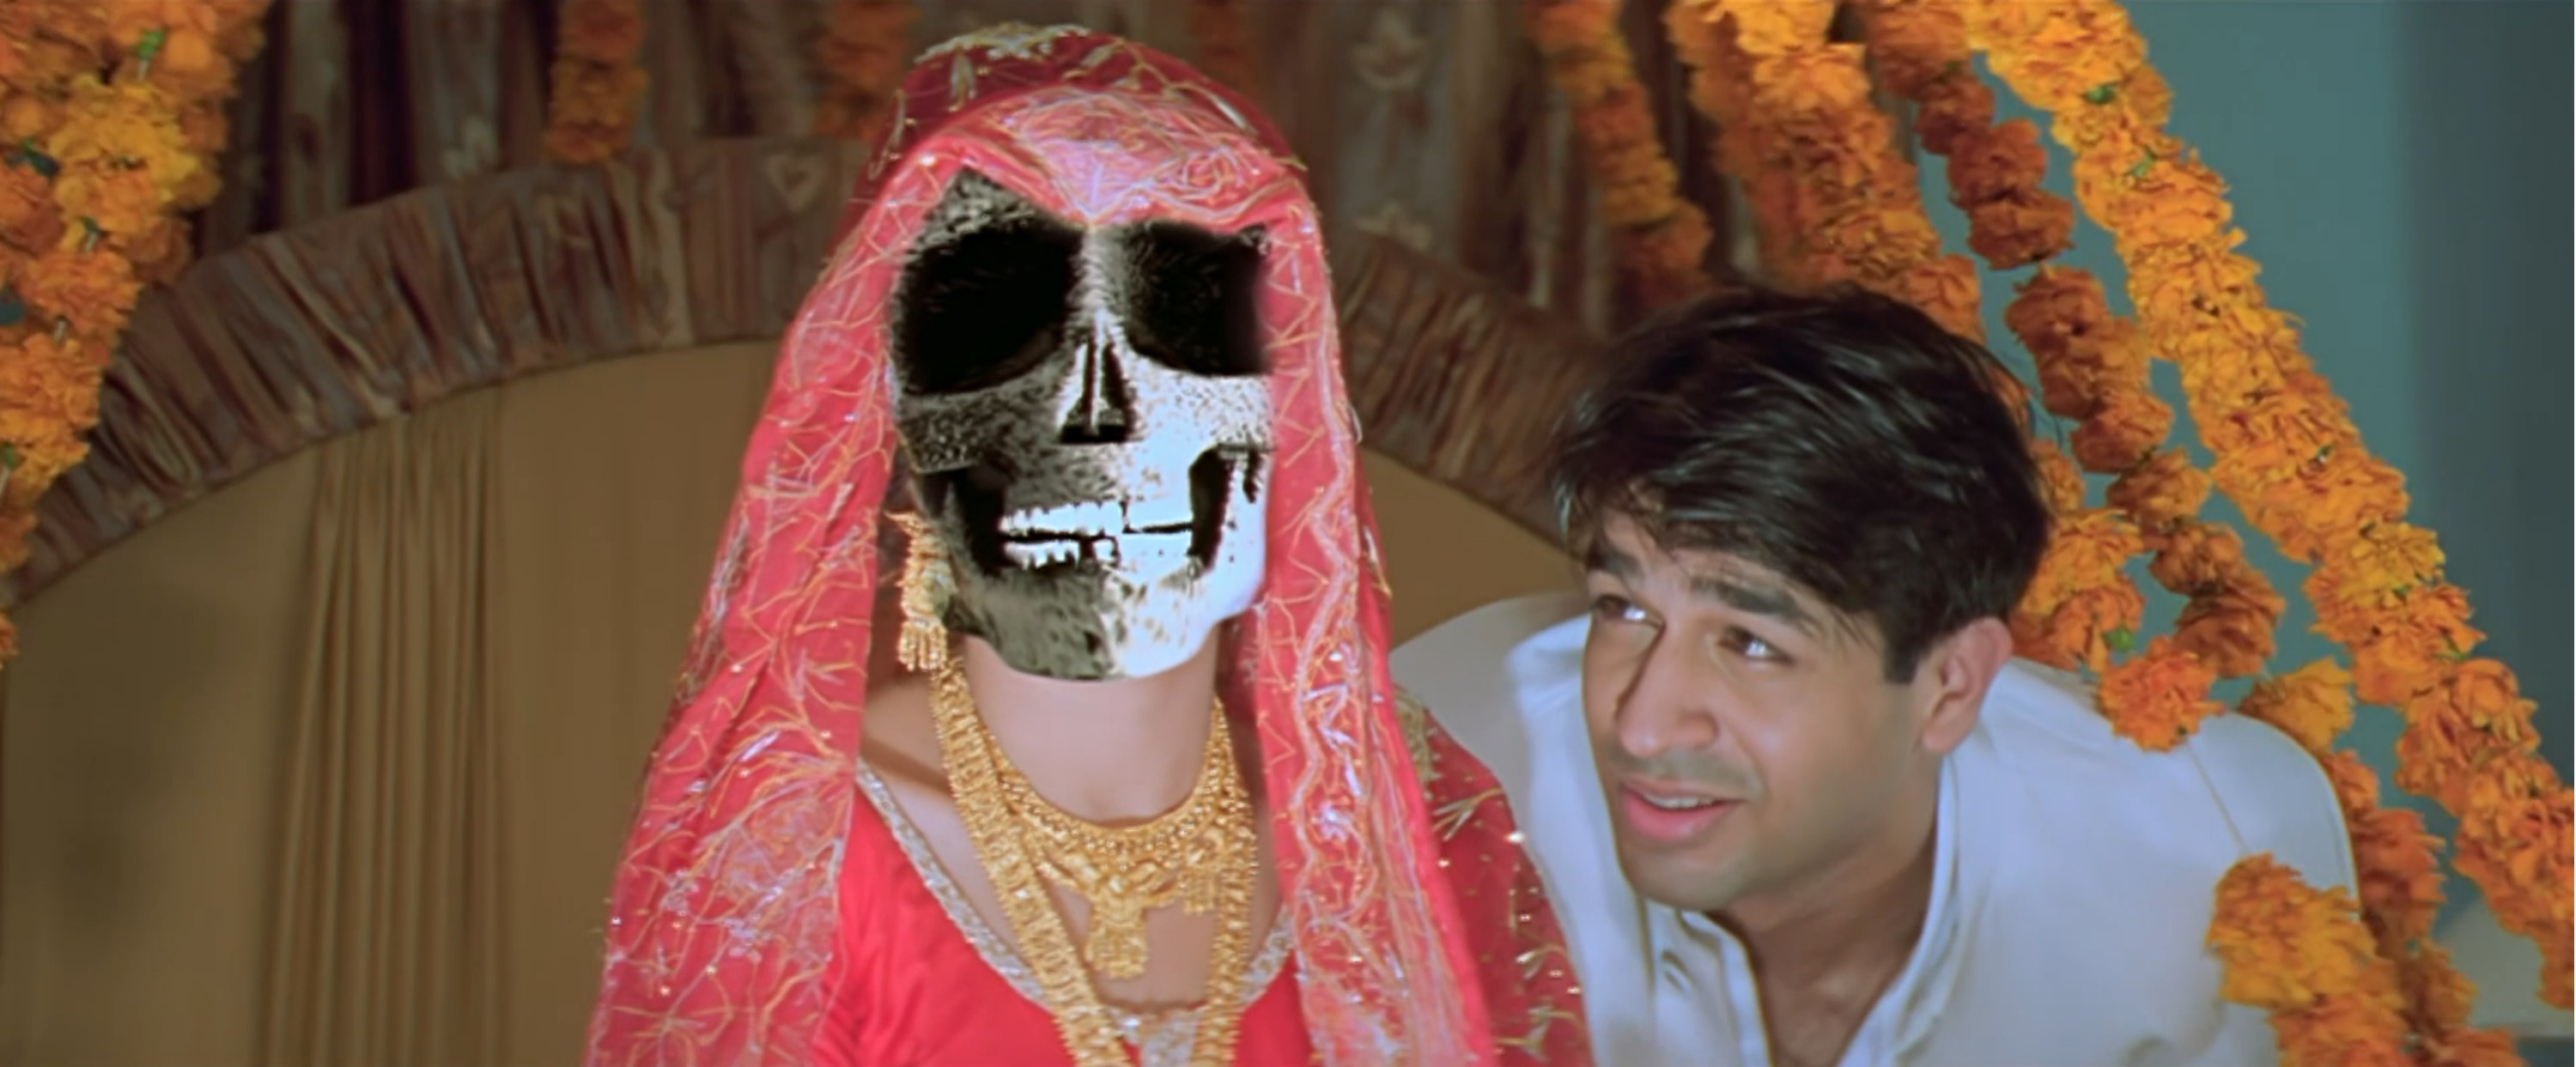 Rajat Bedi next to a woman who&#x27;s face appears to be a skull